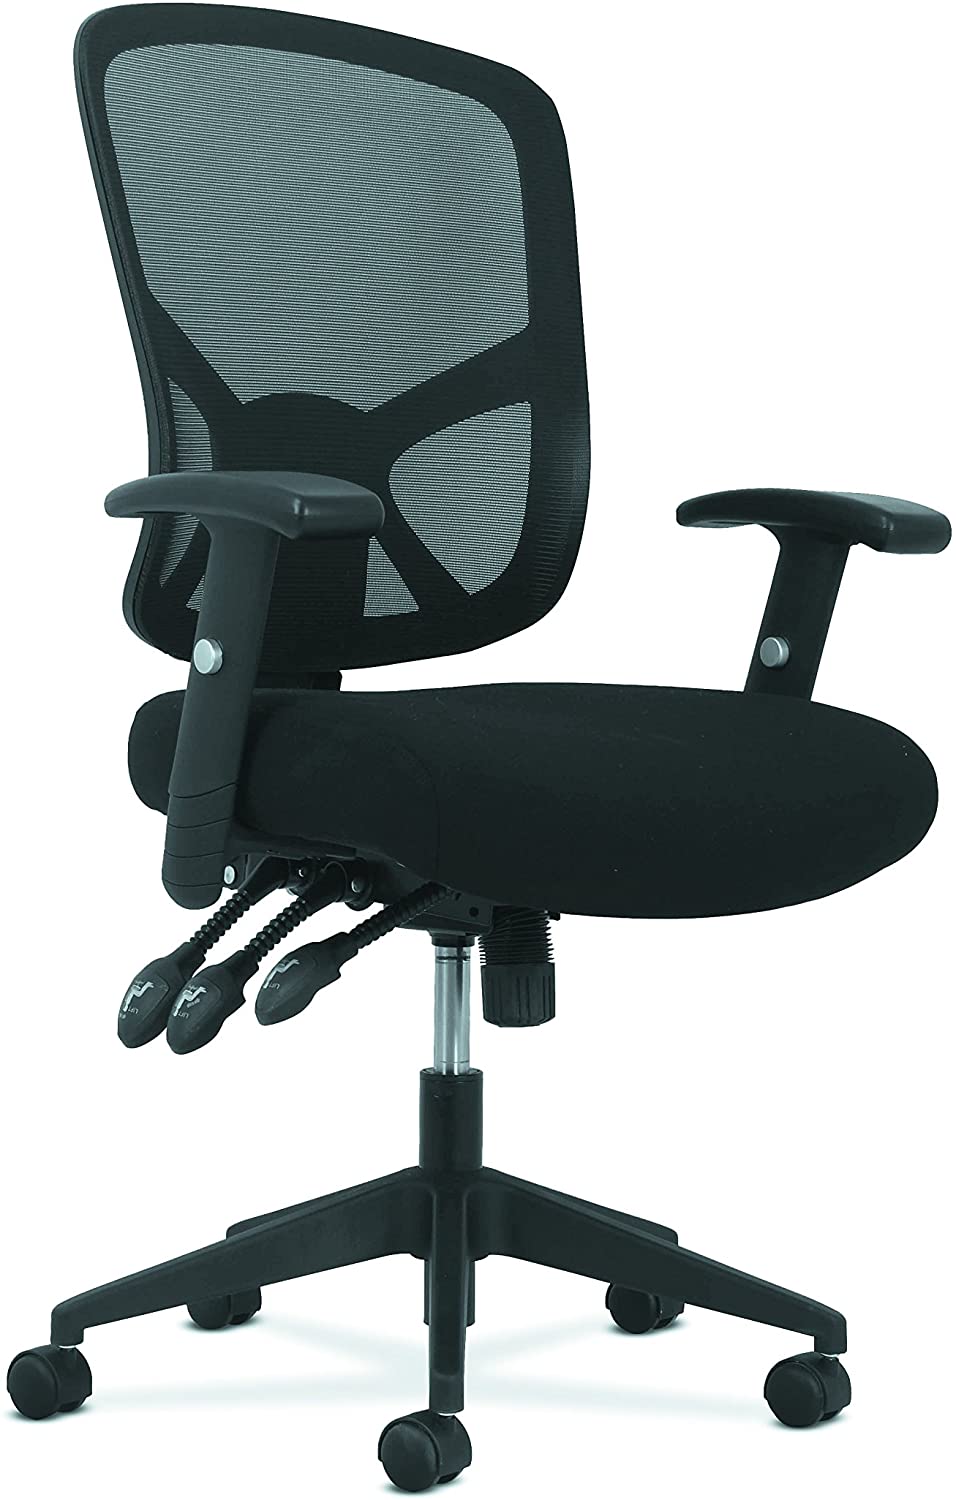 Sadie-Customizable-Ergonomic-High-Back-Mesh-Task-Chair-with-Arms-and-Lumbar-Support-Ergonomic-Computeroffice-Chair-HVST121